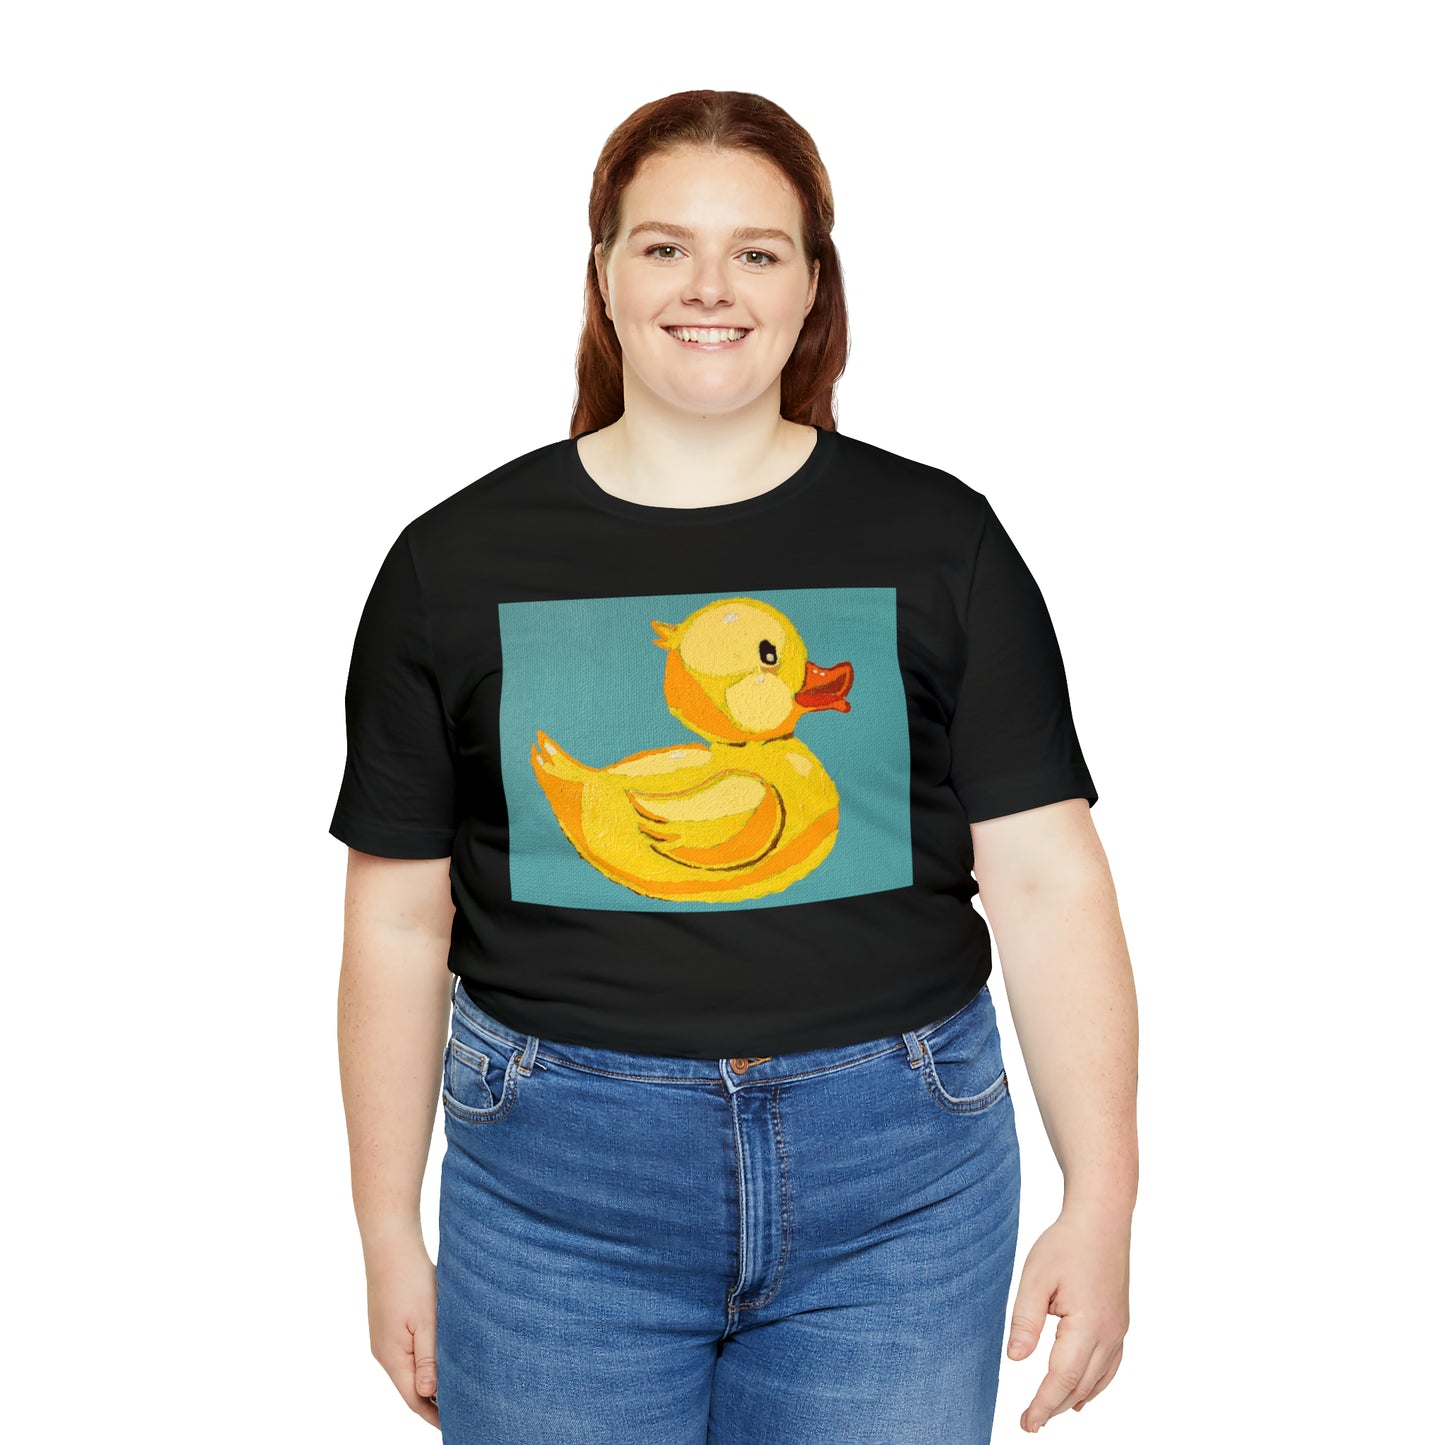 Pop Duck Premium Lifestyle Tee ¬ Perfect for Art Lovers ¬ Trending Art Gifts for Everyone